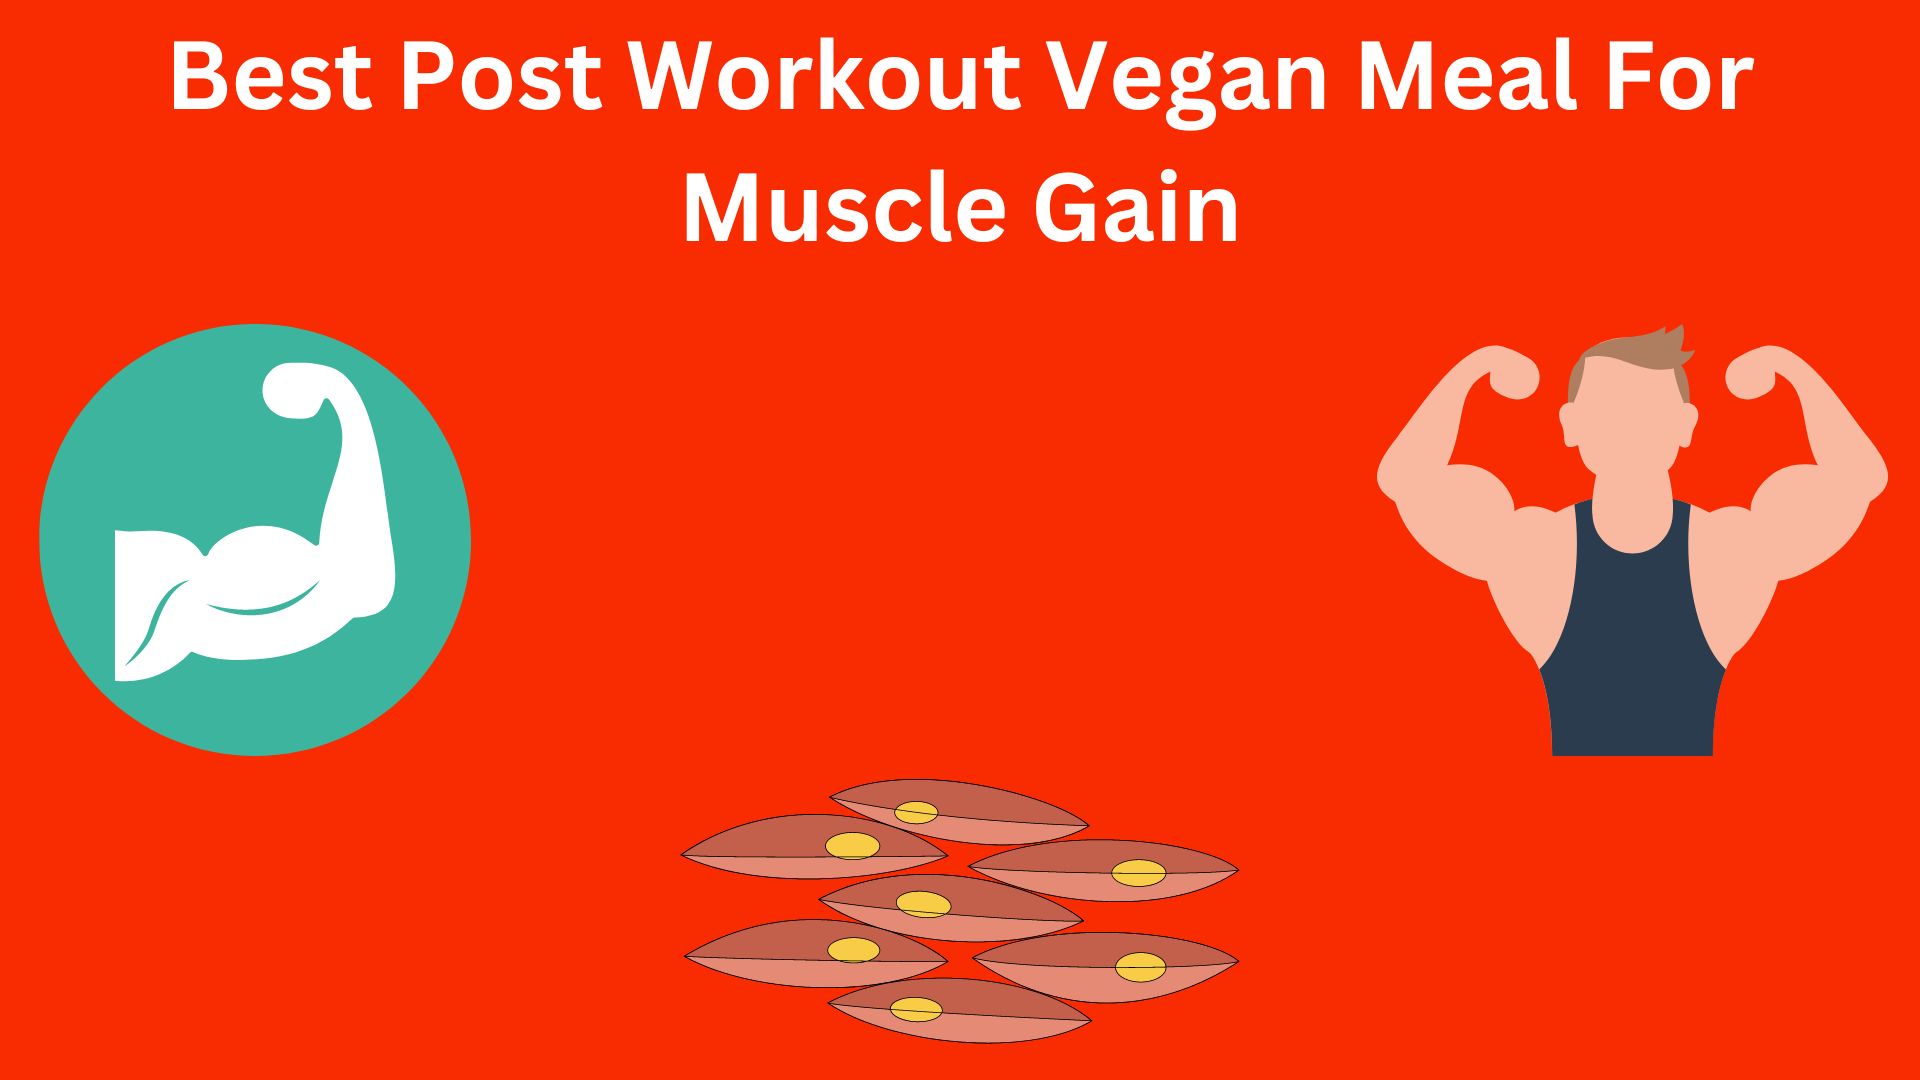 Best Post Workout Vegan Meal For Muscle Gain